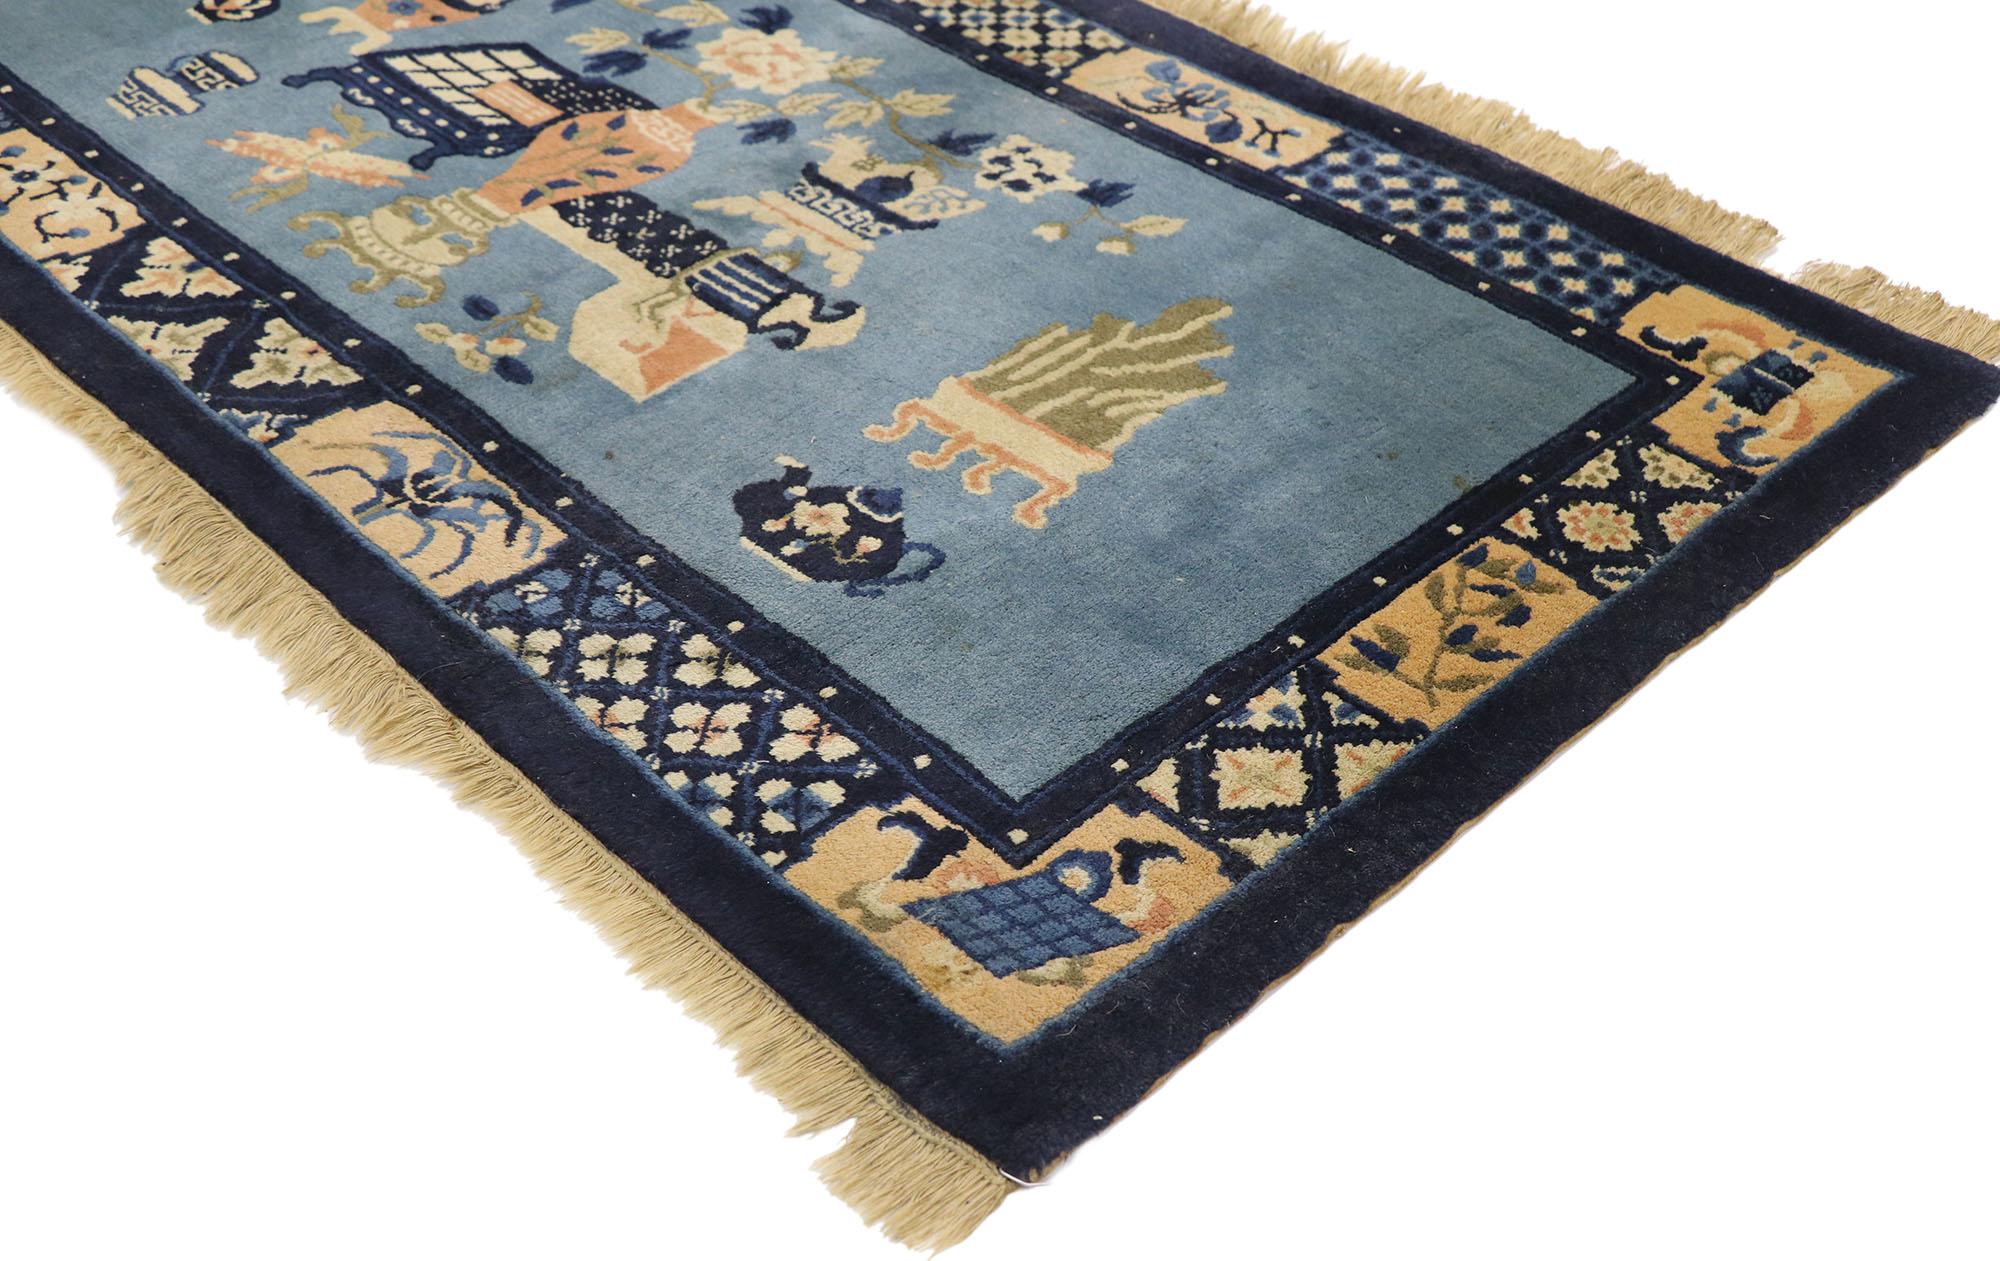 77586, antique Chinese Baotou Scholar’s rug with Confucian Pictorial Design. This hand-knotted wool antique Chinese Baotou rug features a pictorial design overlaid upon a rich blue field. With its cold, arid climate ideal for raising sheep, Baotou,